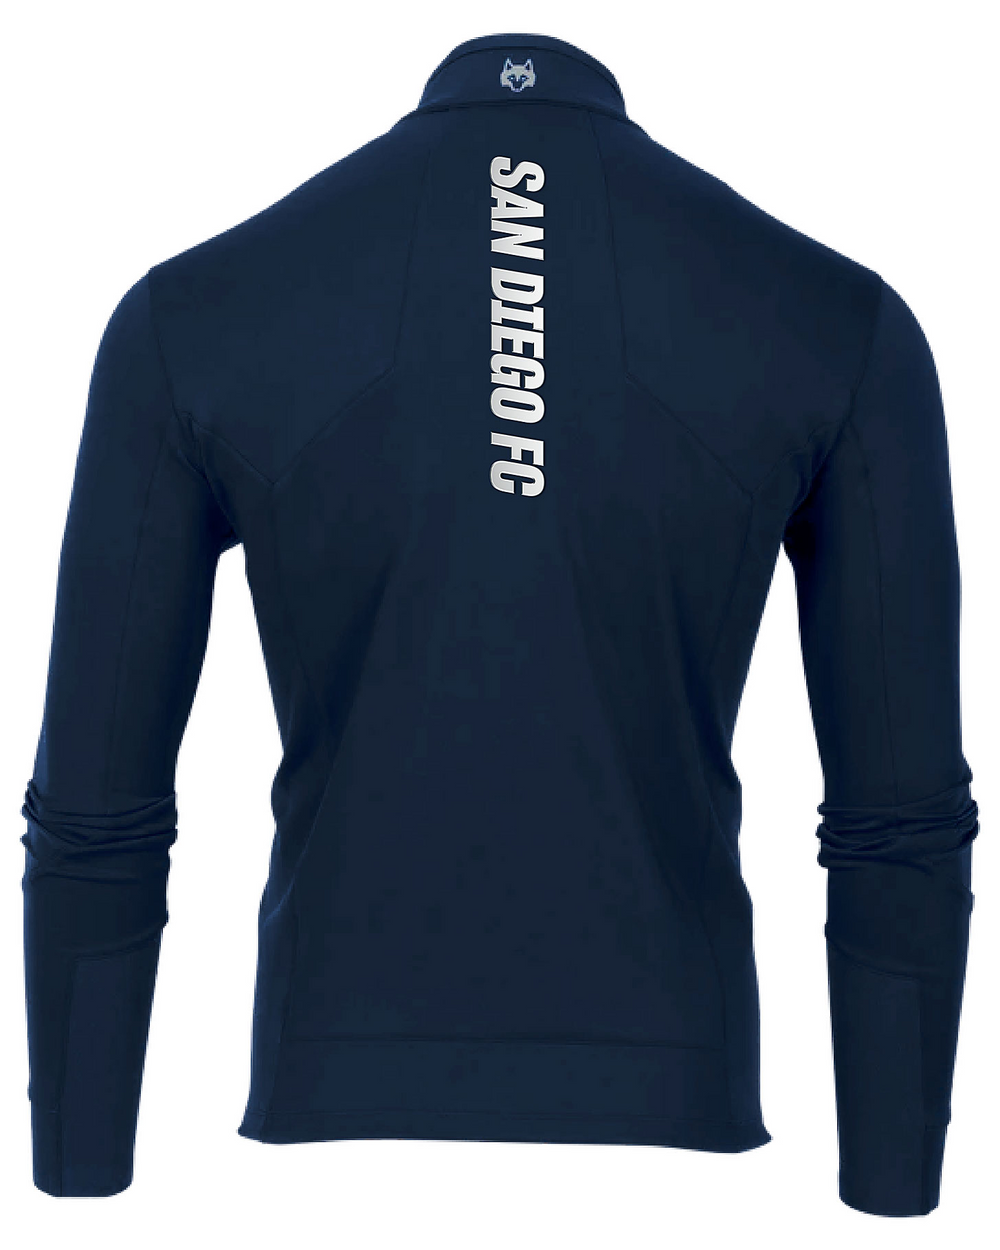 Greyson Full Zip w/ SD Flow On The Front and San Diego FC On Back